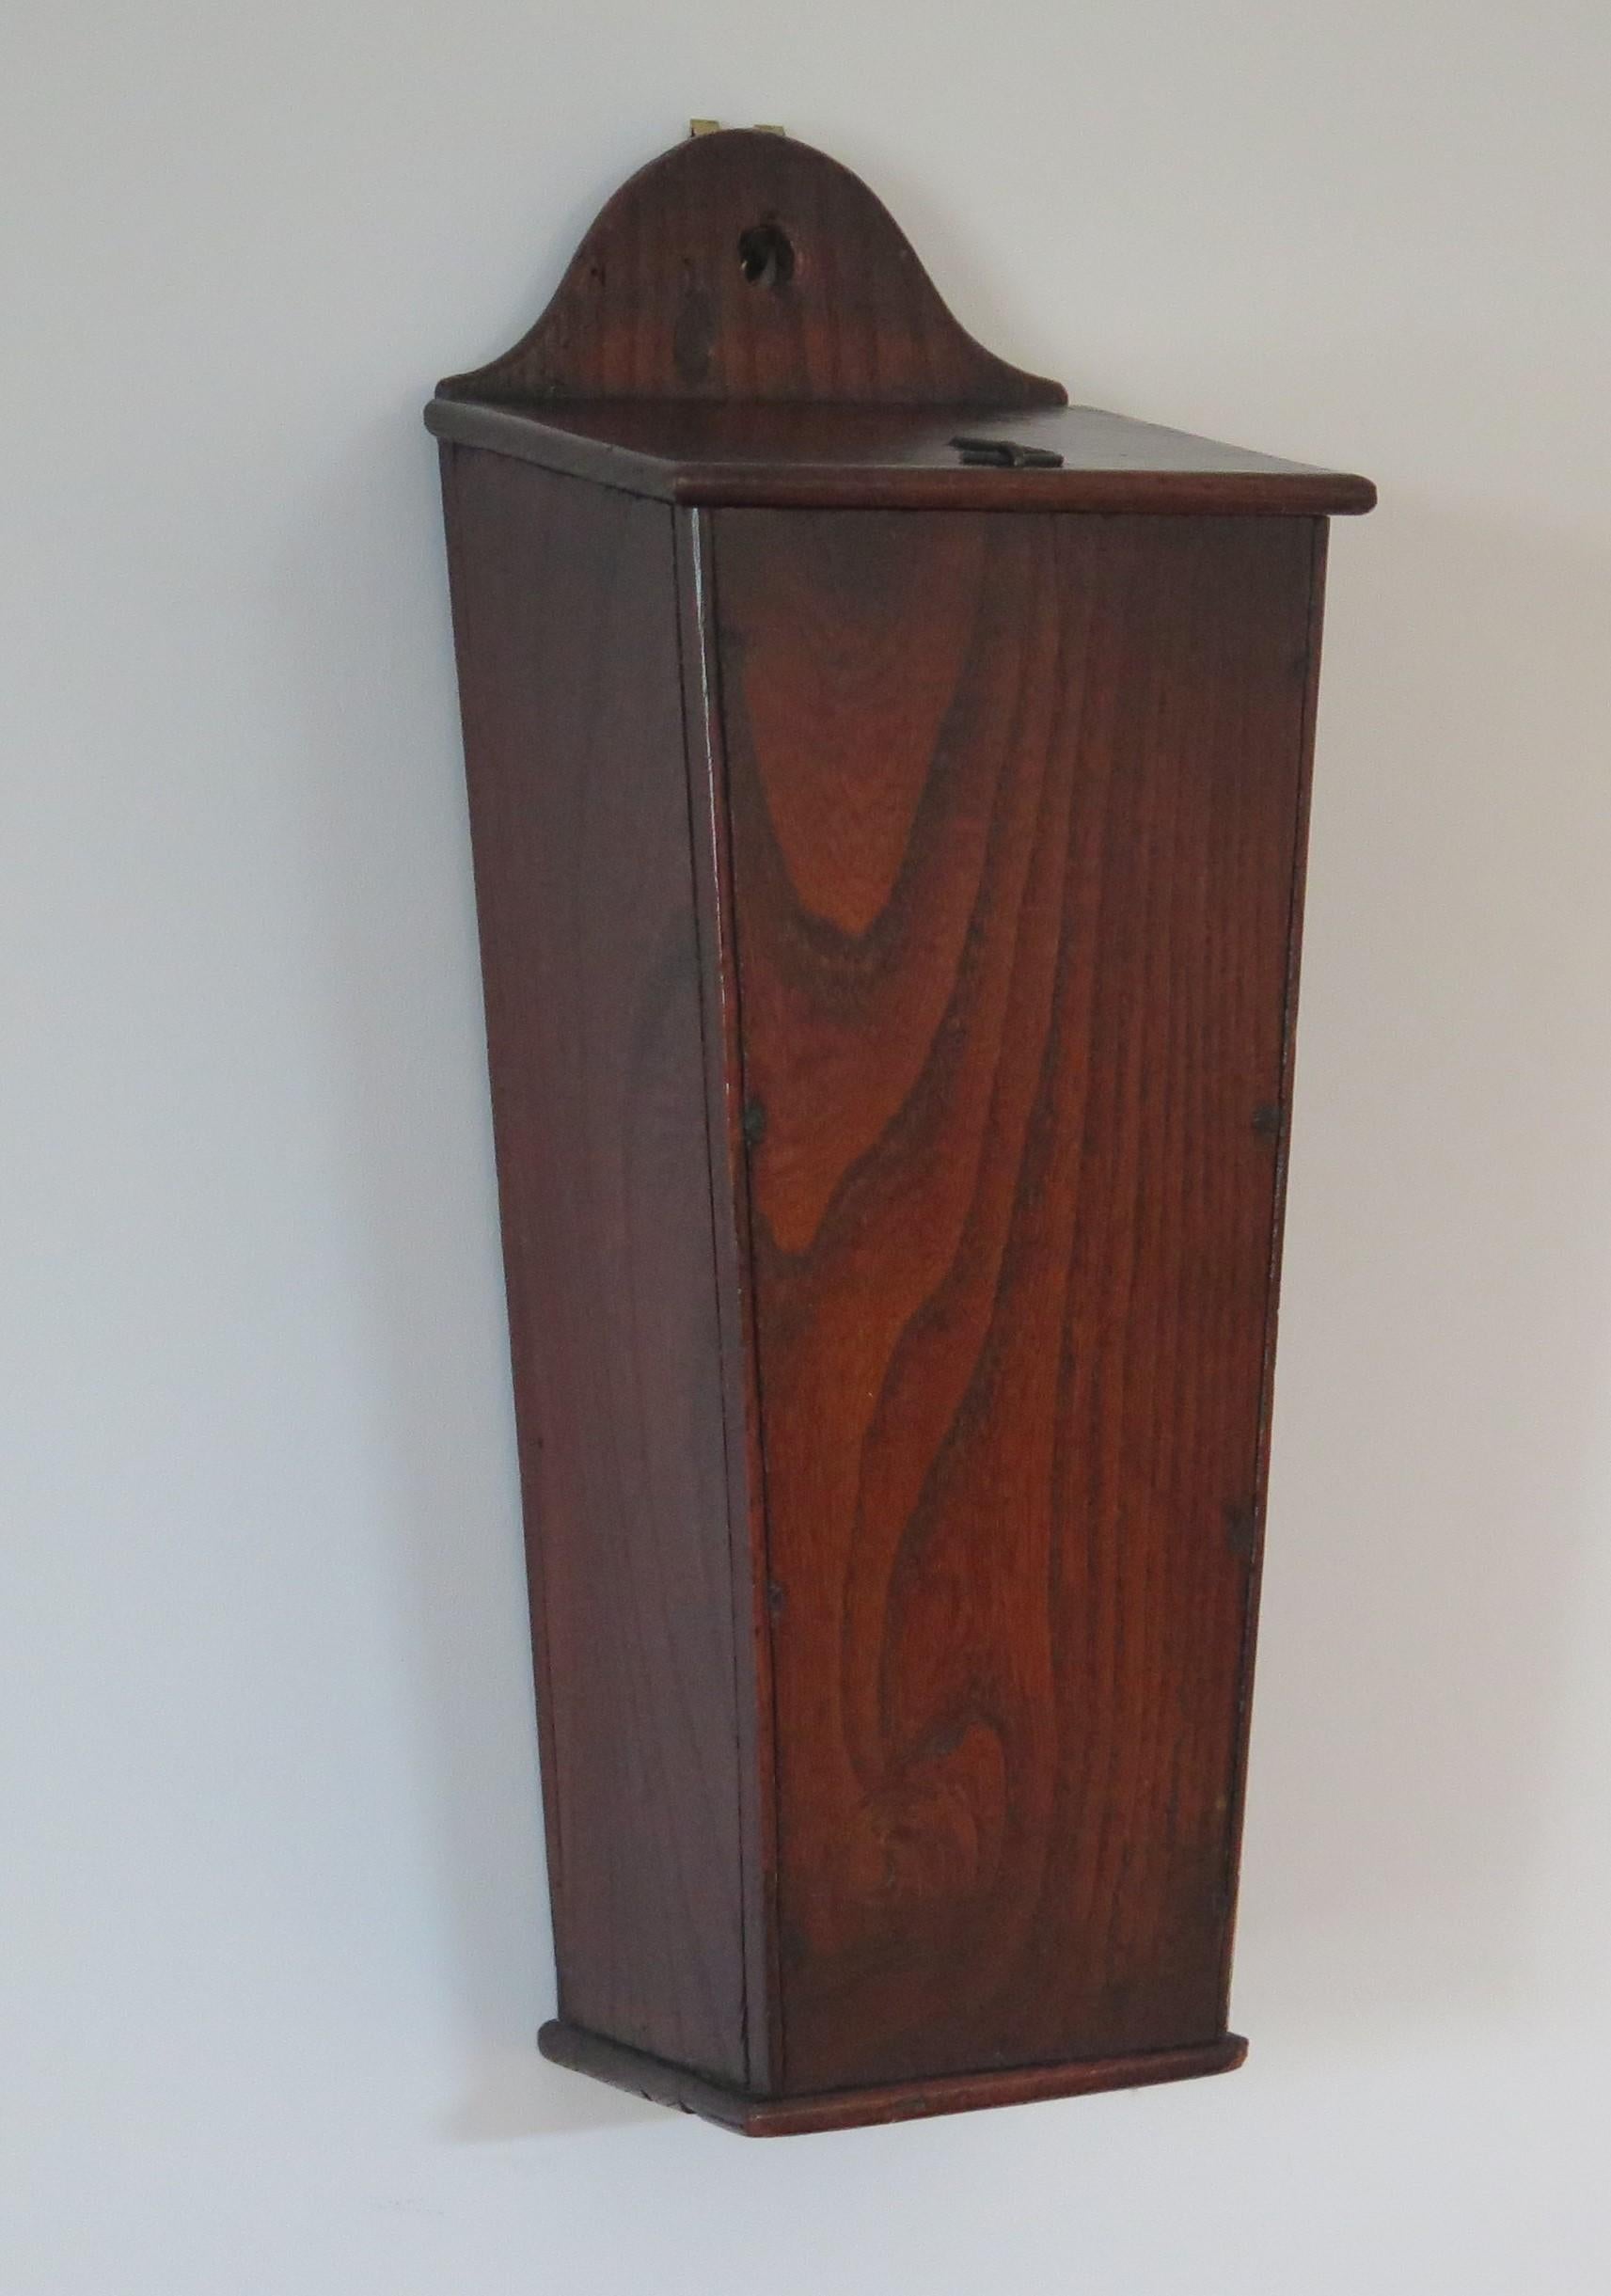 A very good example of a country candle box that could be found in many country cottages during 18th Century England.

This is a particularly good example, not fussy, but utilitarian in its construction. The piece is made of solid elm that has